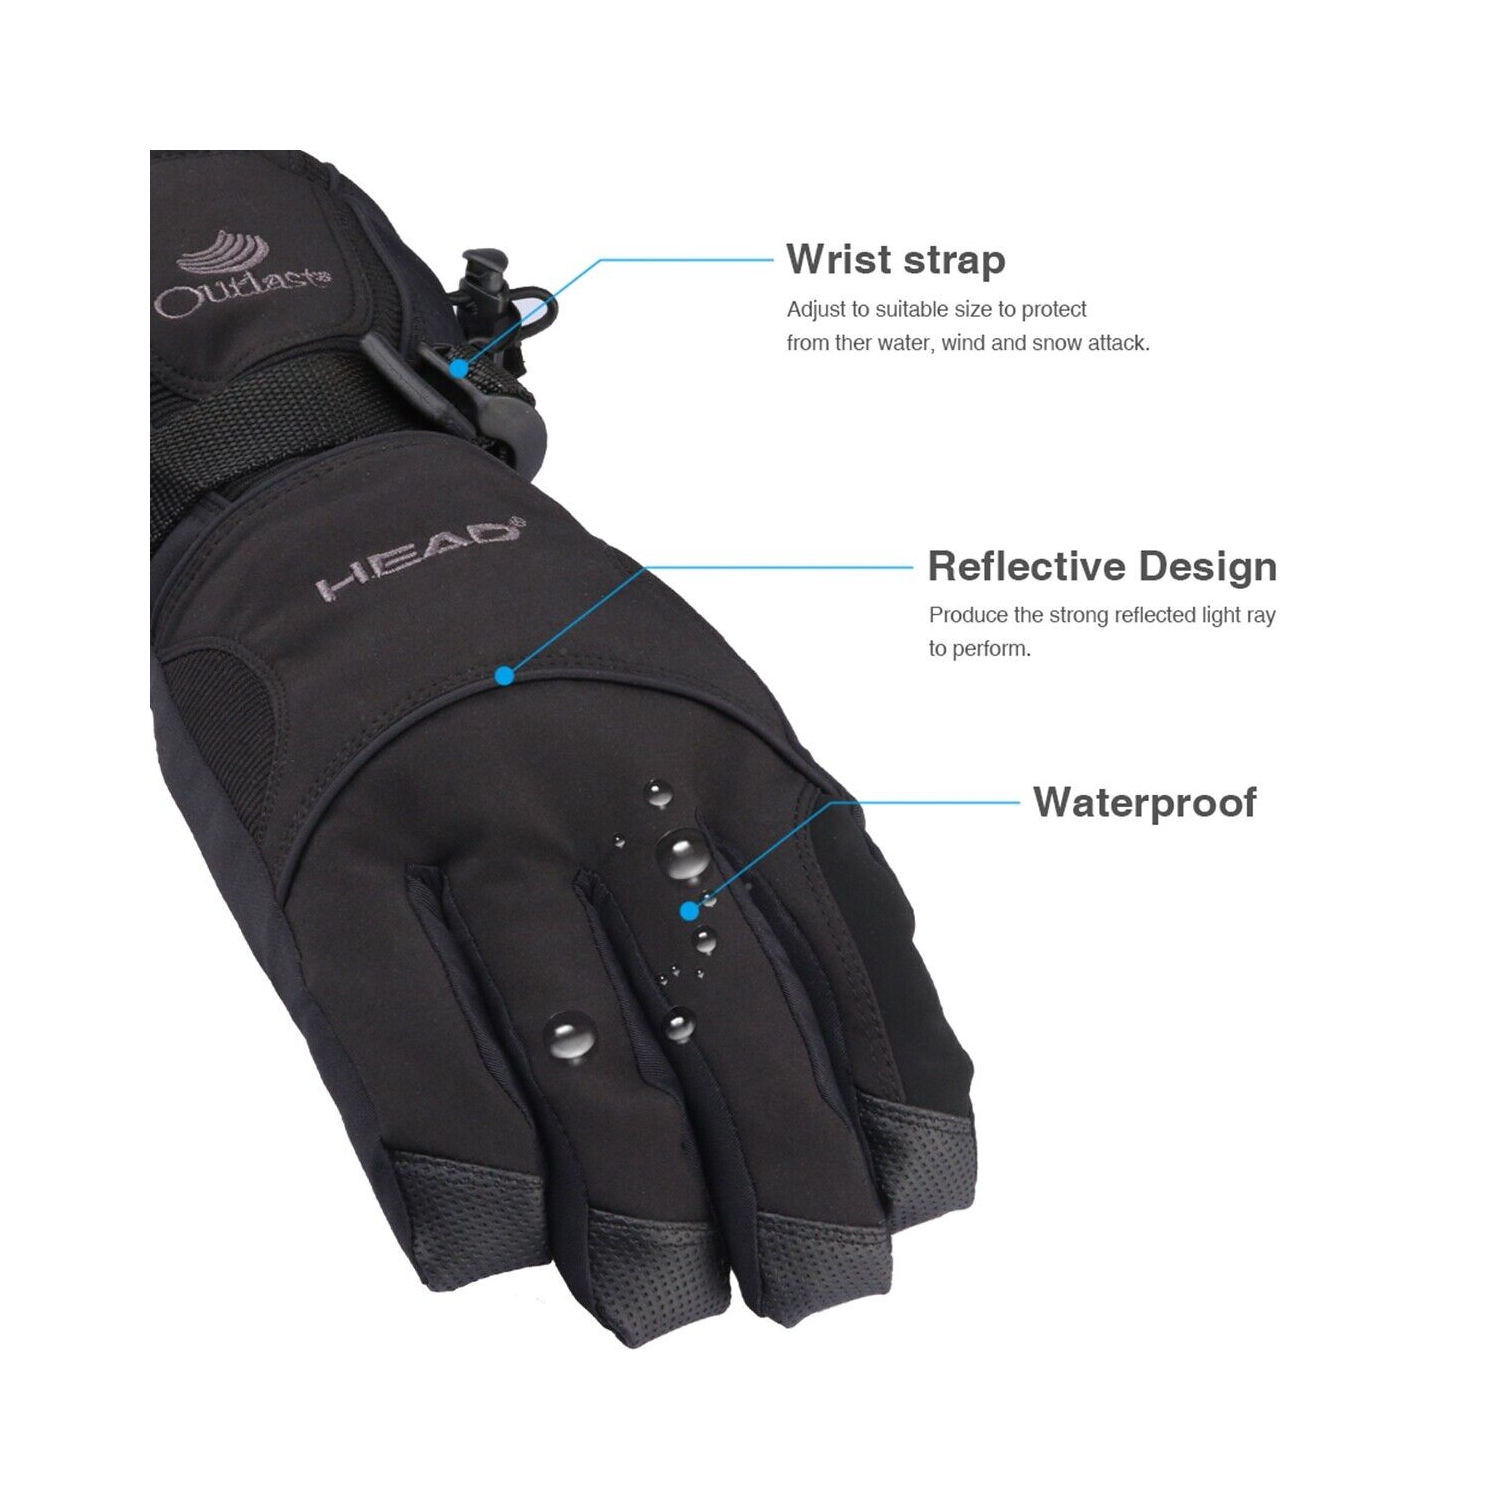 Winter Heat Gloves Waterproof, Rechargeable, And Versatile For Skiing,  Snowboarding, Hunting, And More! From Qiyuan07, $30.27